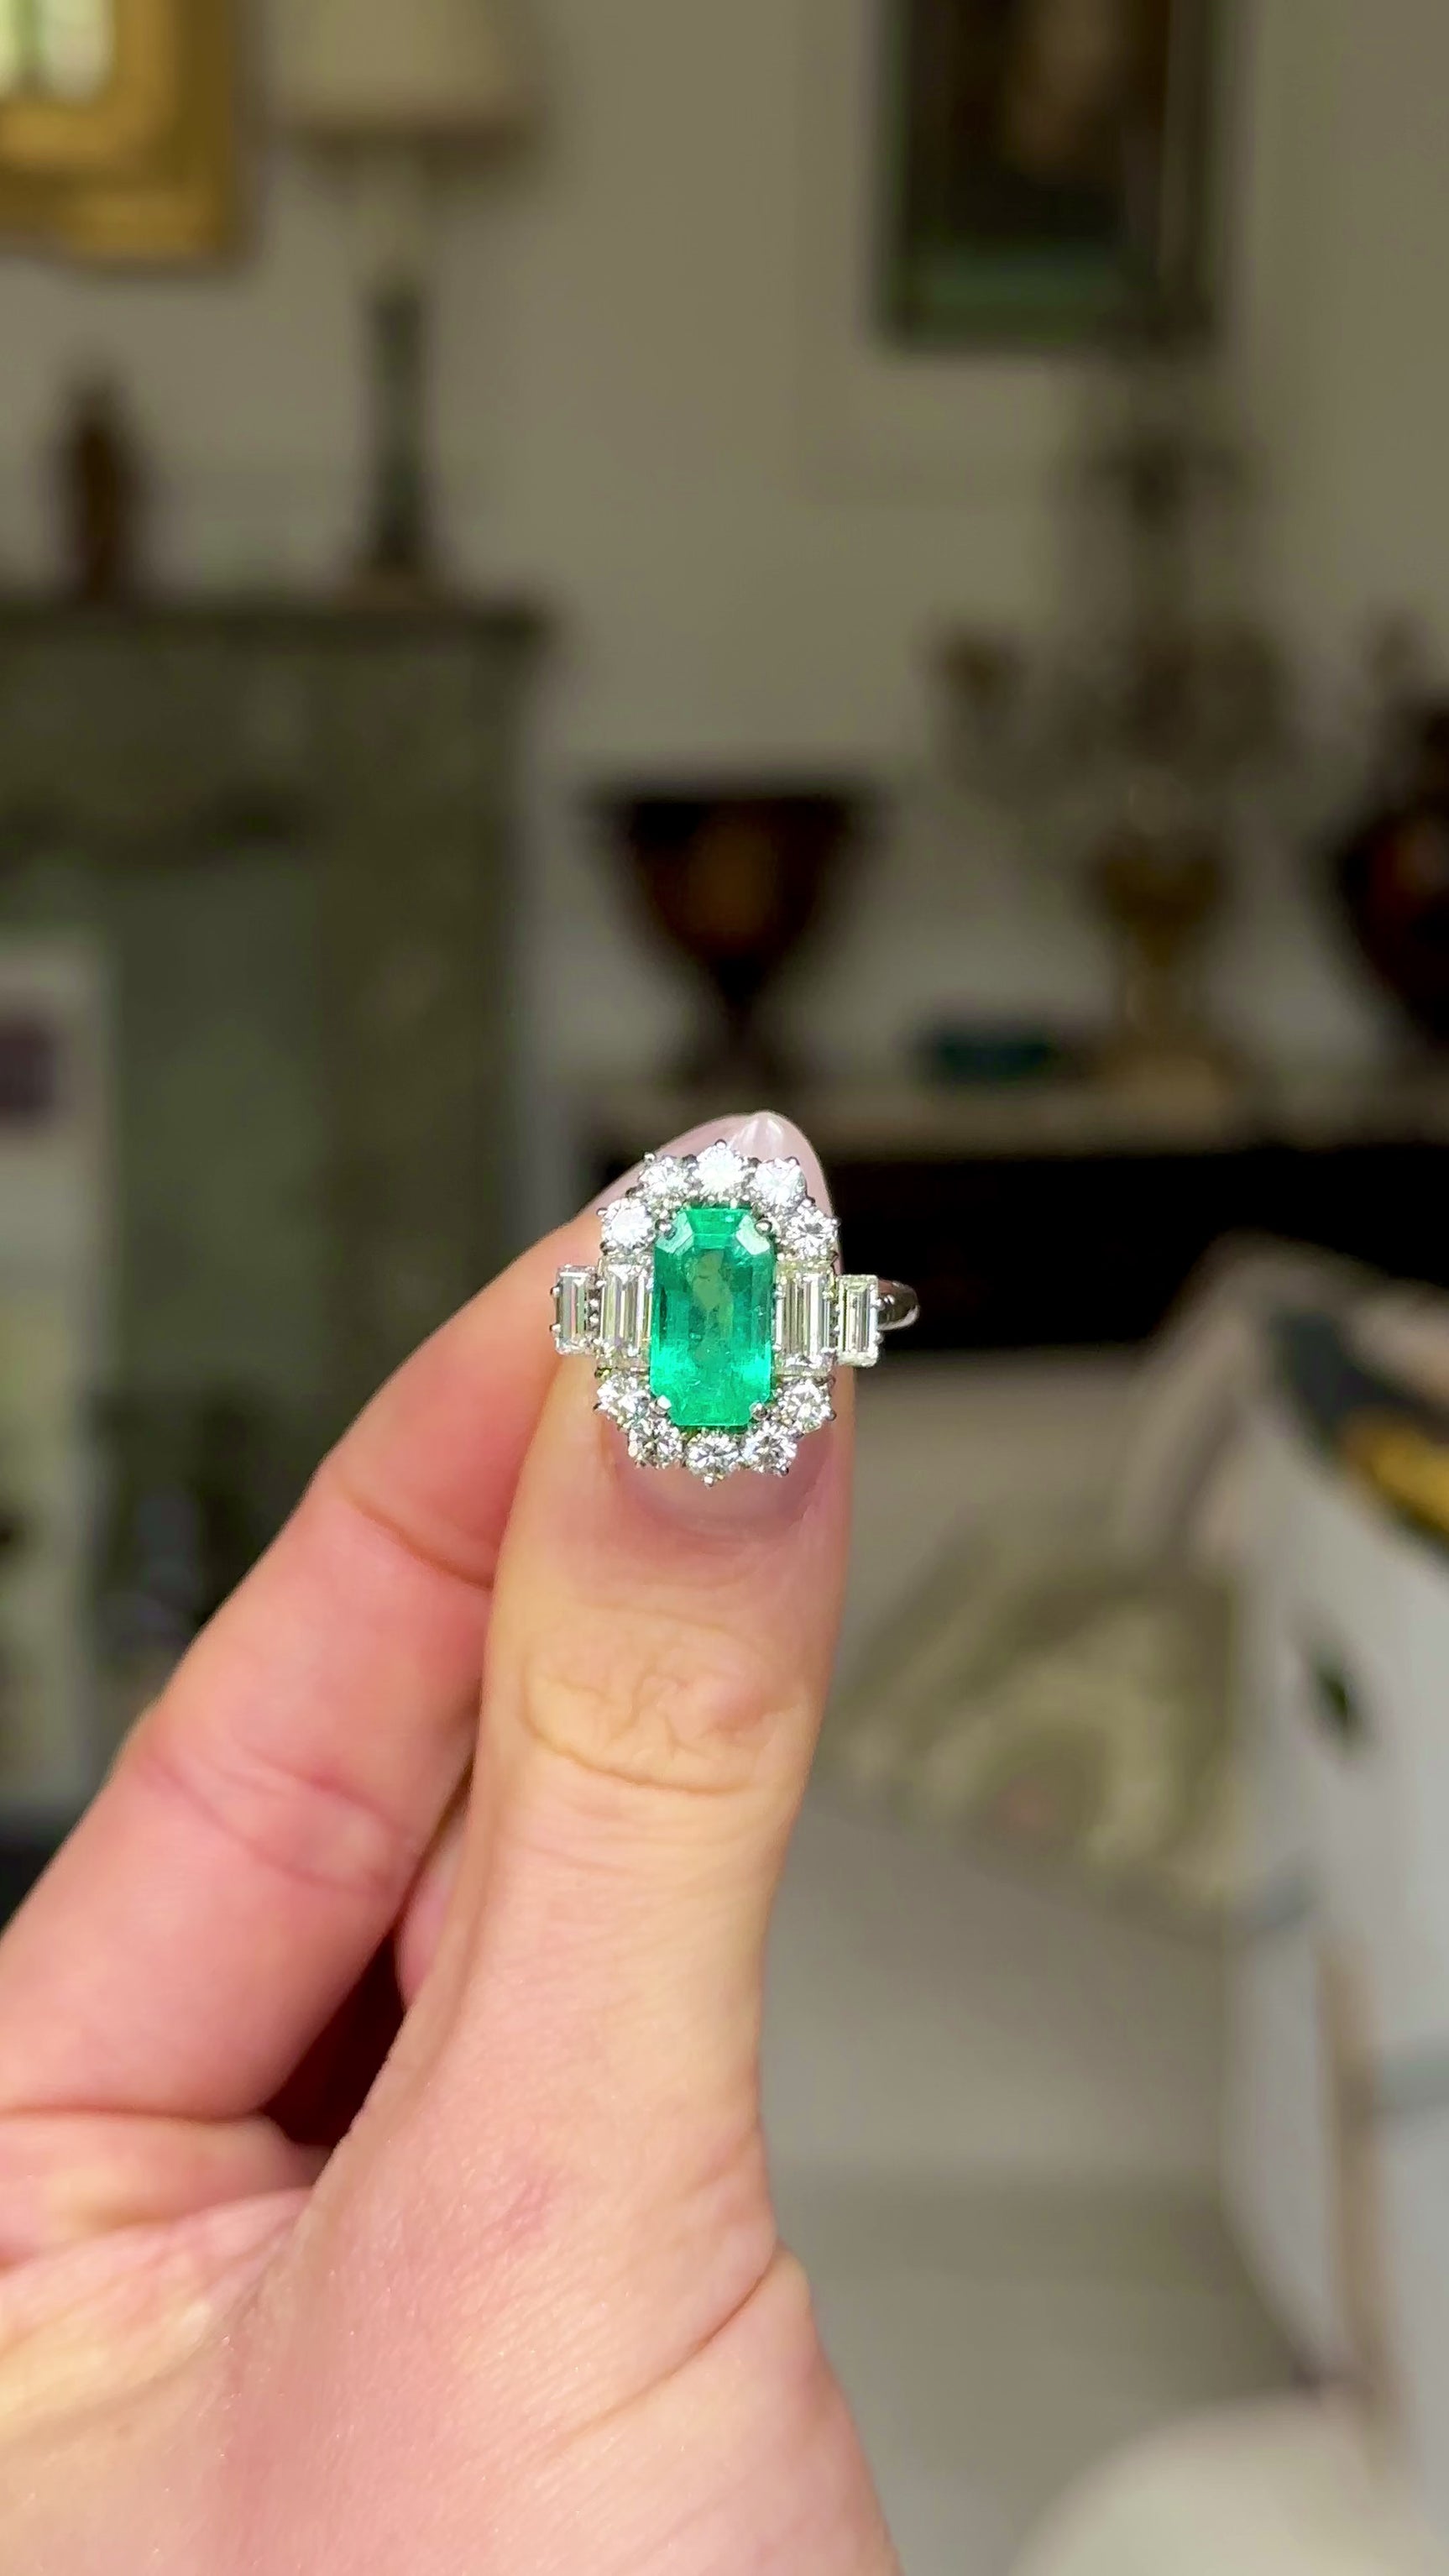 Vintage emerald and diamond cluster ring, held in fingers and moved around to give perspective.